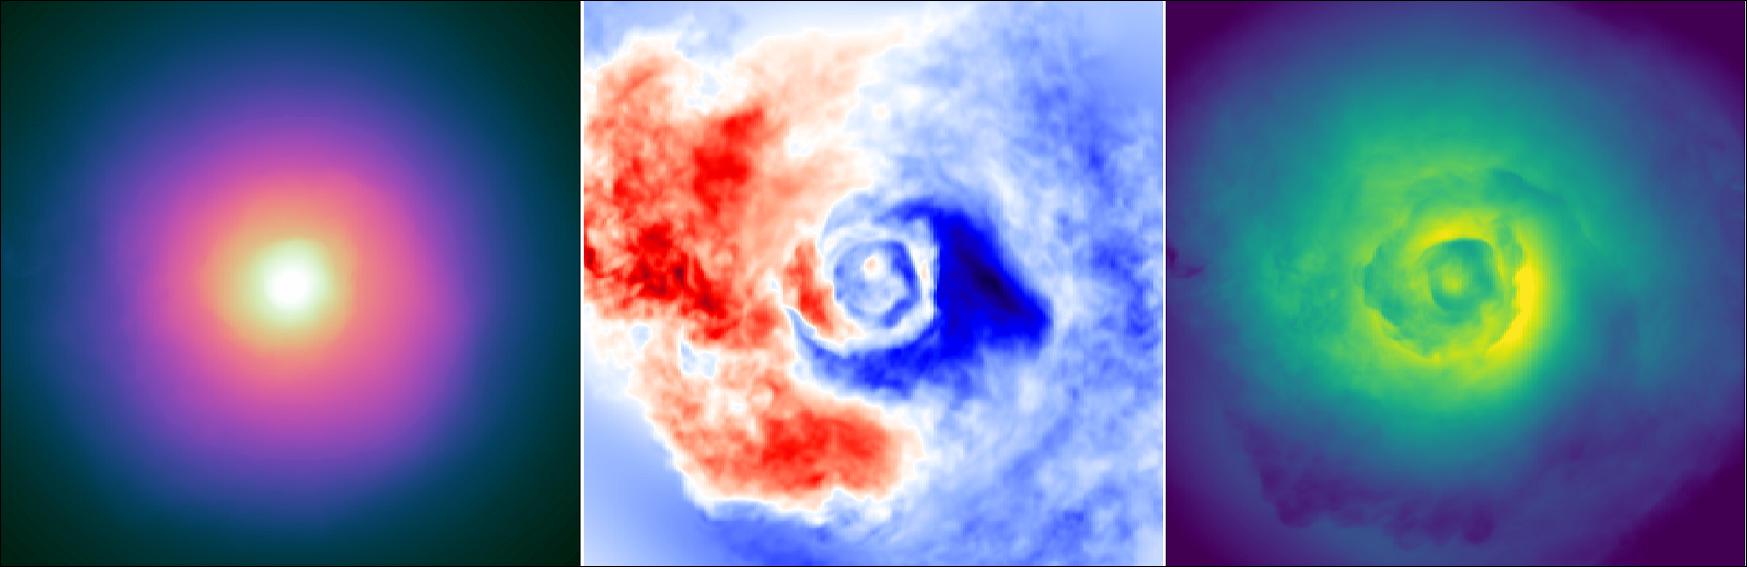 Figure 49: This image shows a simulation of the Perseus galaxy cluster – one of the most massive known objects in the Universe. A new study based on observations from ESA’s XMM-Newton has spotted the first signs of this gas splashing and sloshing around within Perseus – a behavior that, while predicted, had never been seen before. These three simulated frames show the surface brightness of the cluster gas in X-rays (left), the temperature of the gas (middle), and the velocity of the gas (right). The brightest gas is seen in shades of orange-yellow and the dimmest in dark purple and black (left); the hottest gas is in dark red and the coolest in dark blue (center); and the fastest gas is in shades of lime and yellow, while the slowest is dark blue (right), image credit: Courtesy of J. Hone, Harvard-Smithsonian Center for Astrophysics